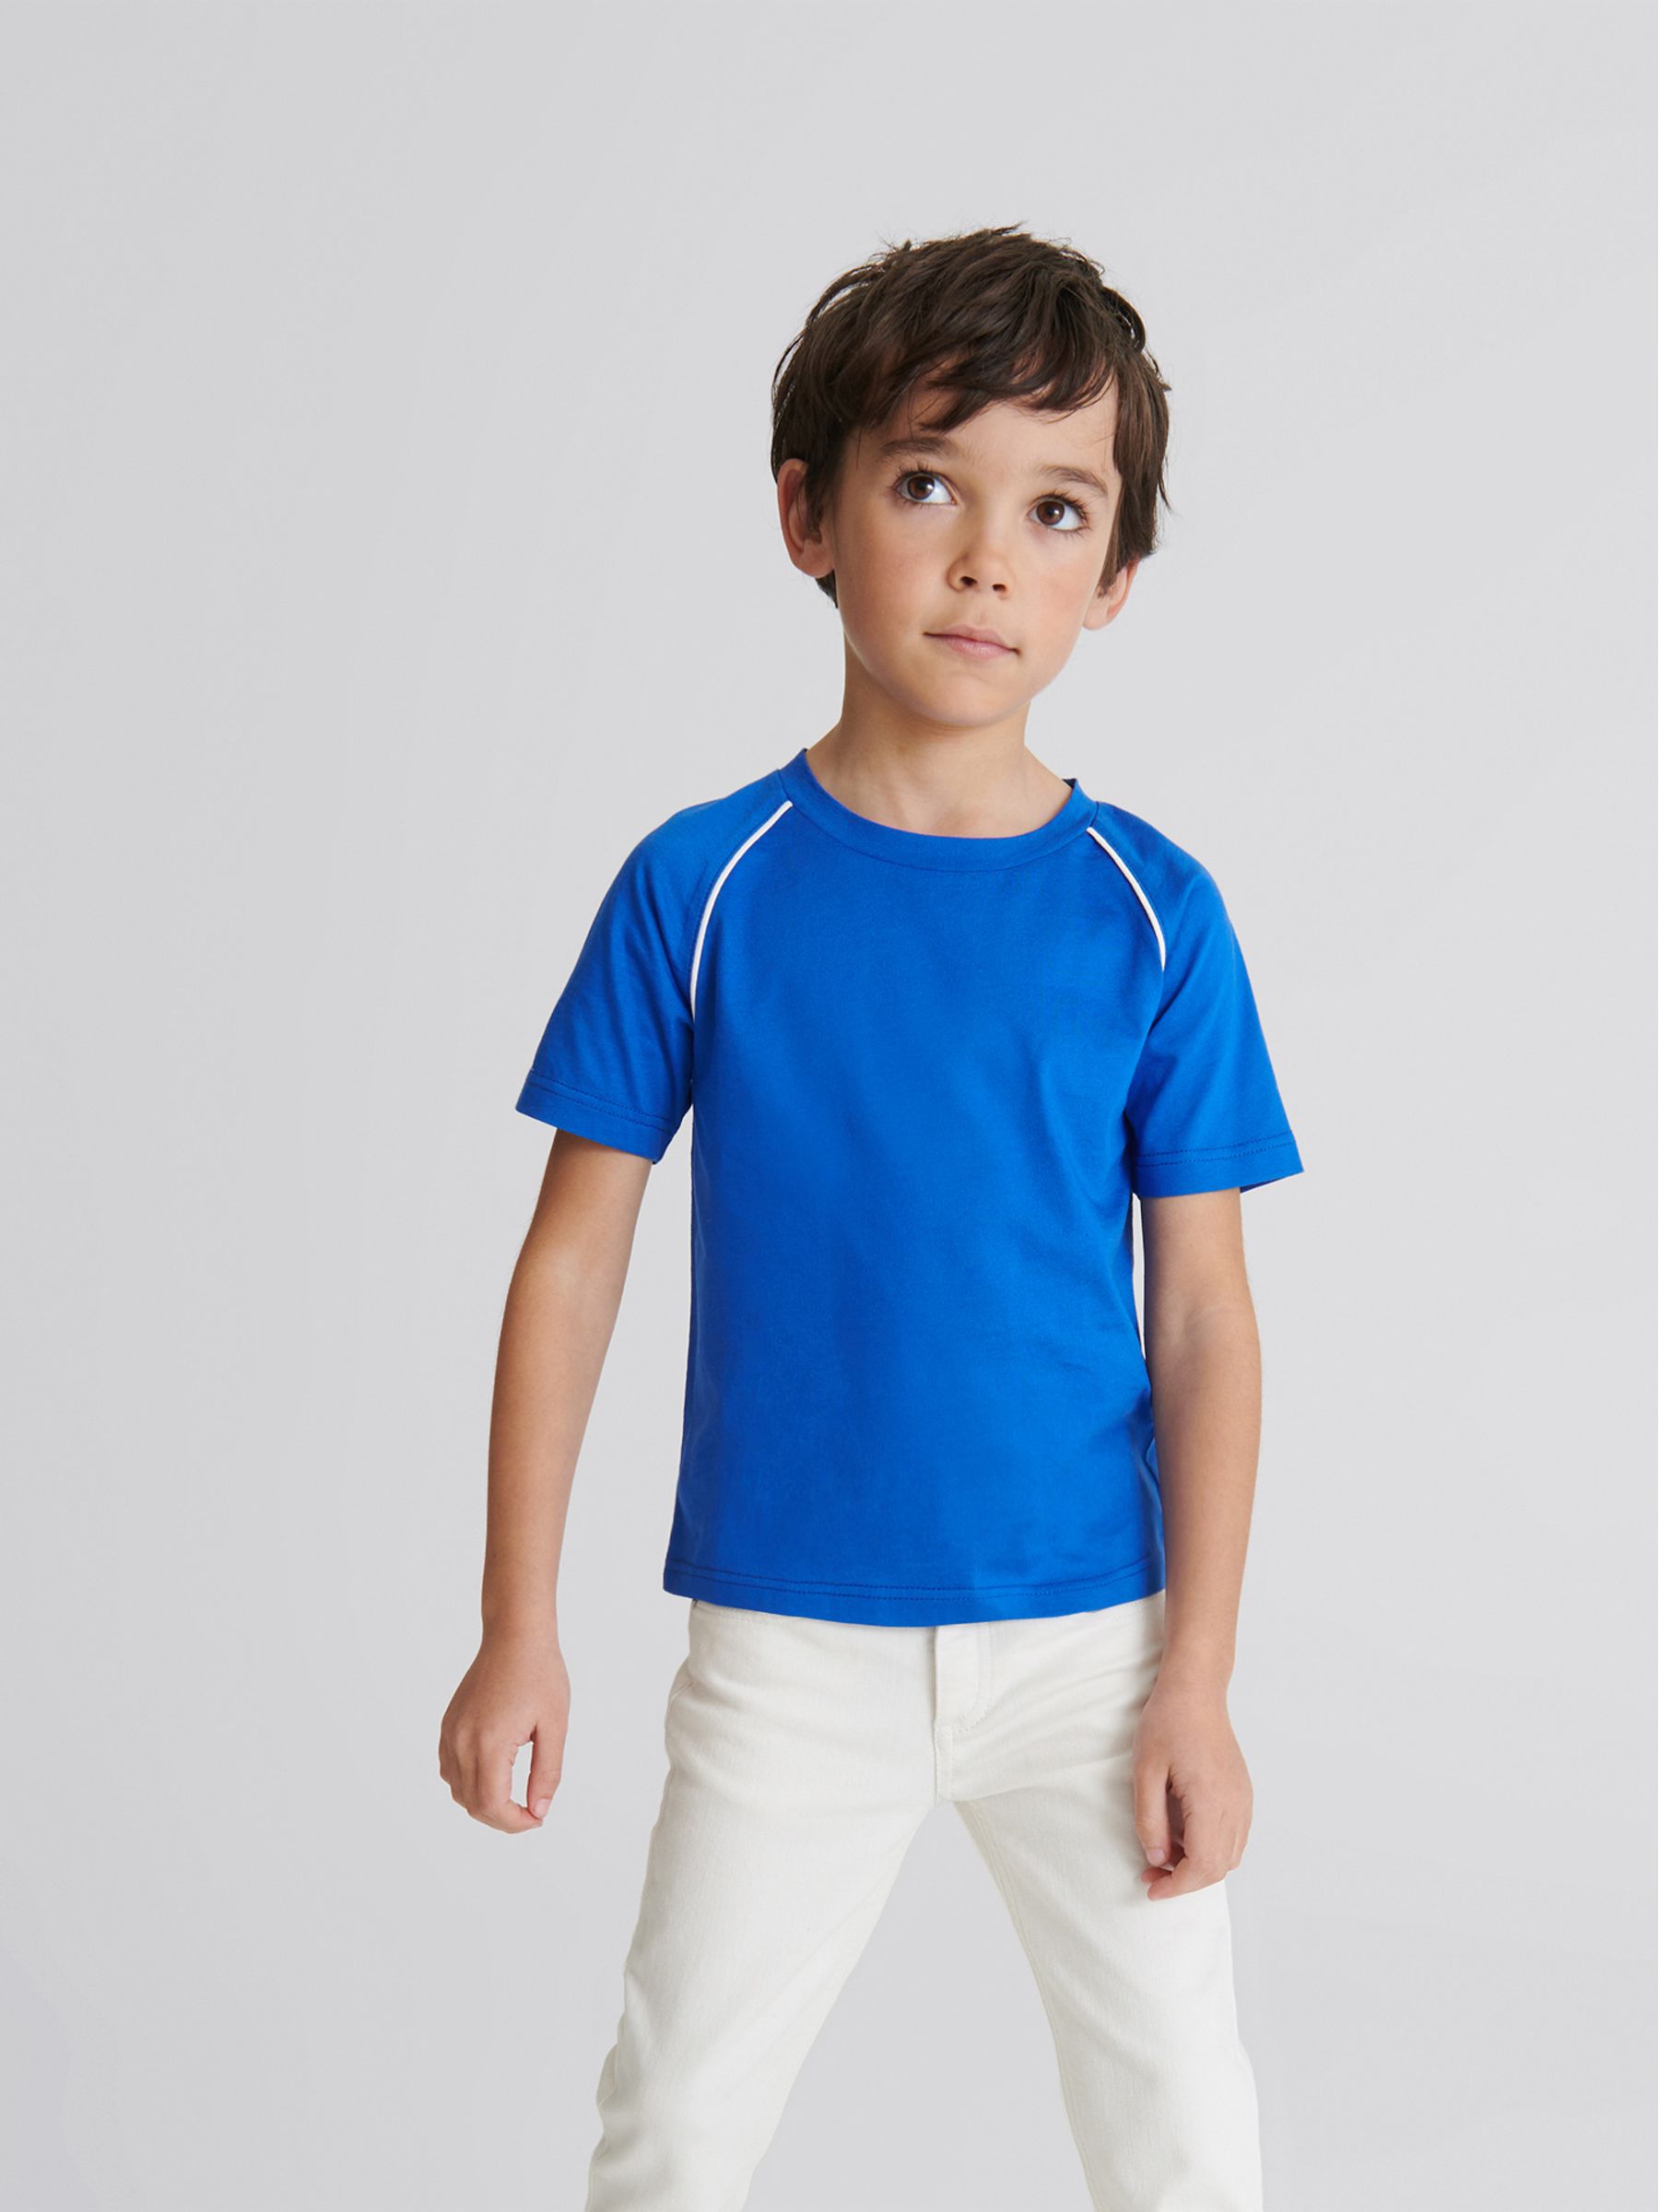 Reiss Stratford Junior Piped Knitted Trim Crew Neck Tee - REISS